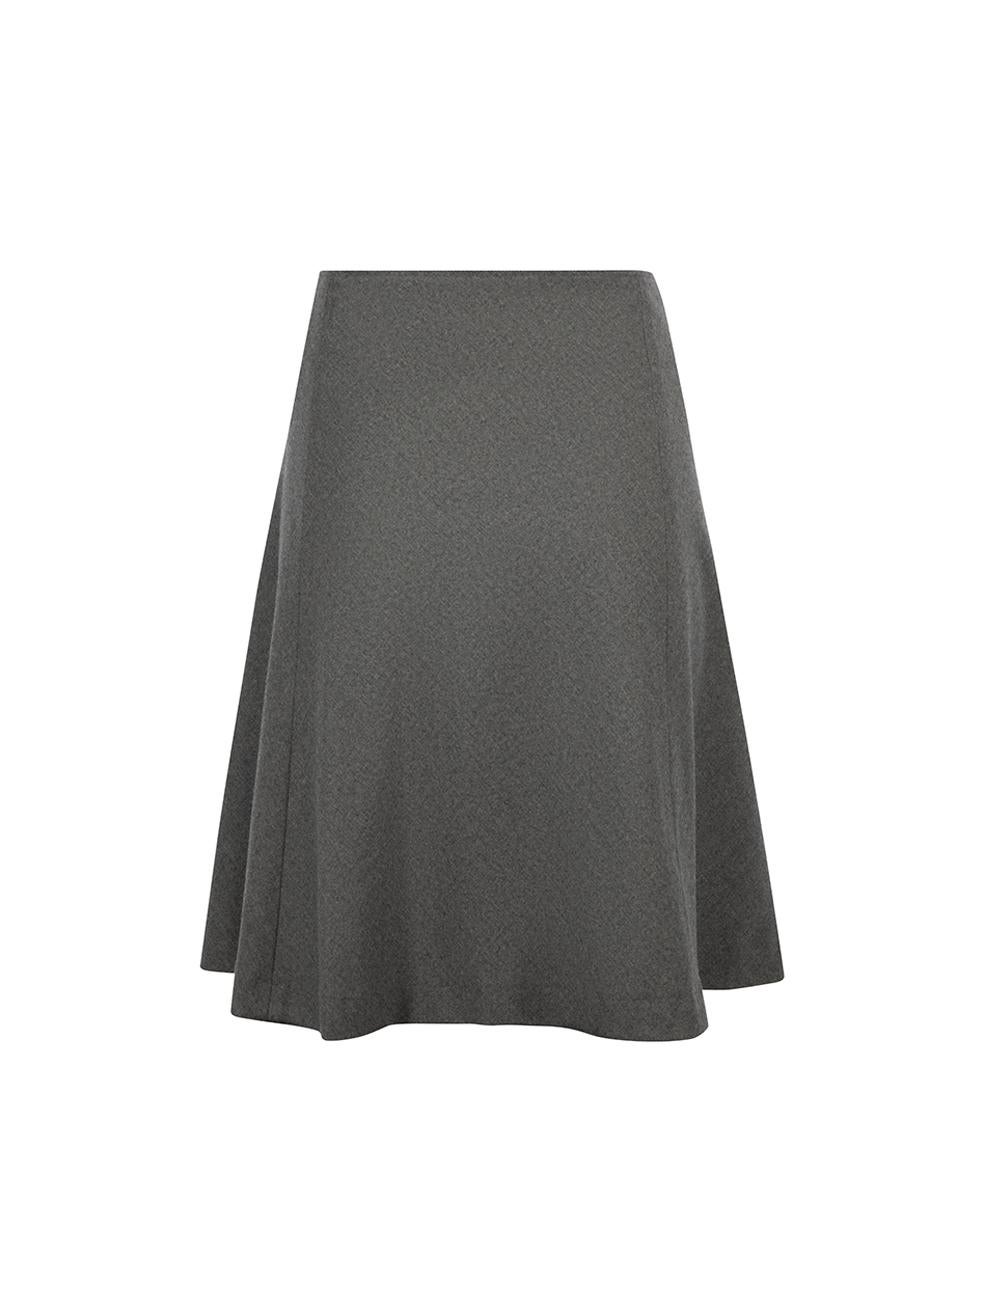 Grey Silk A-Line Mini Skirt Size L In Good Condition For Sale In London, GB